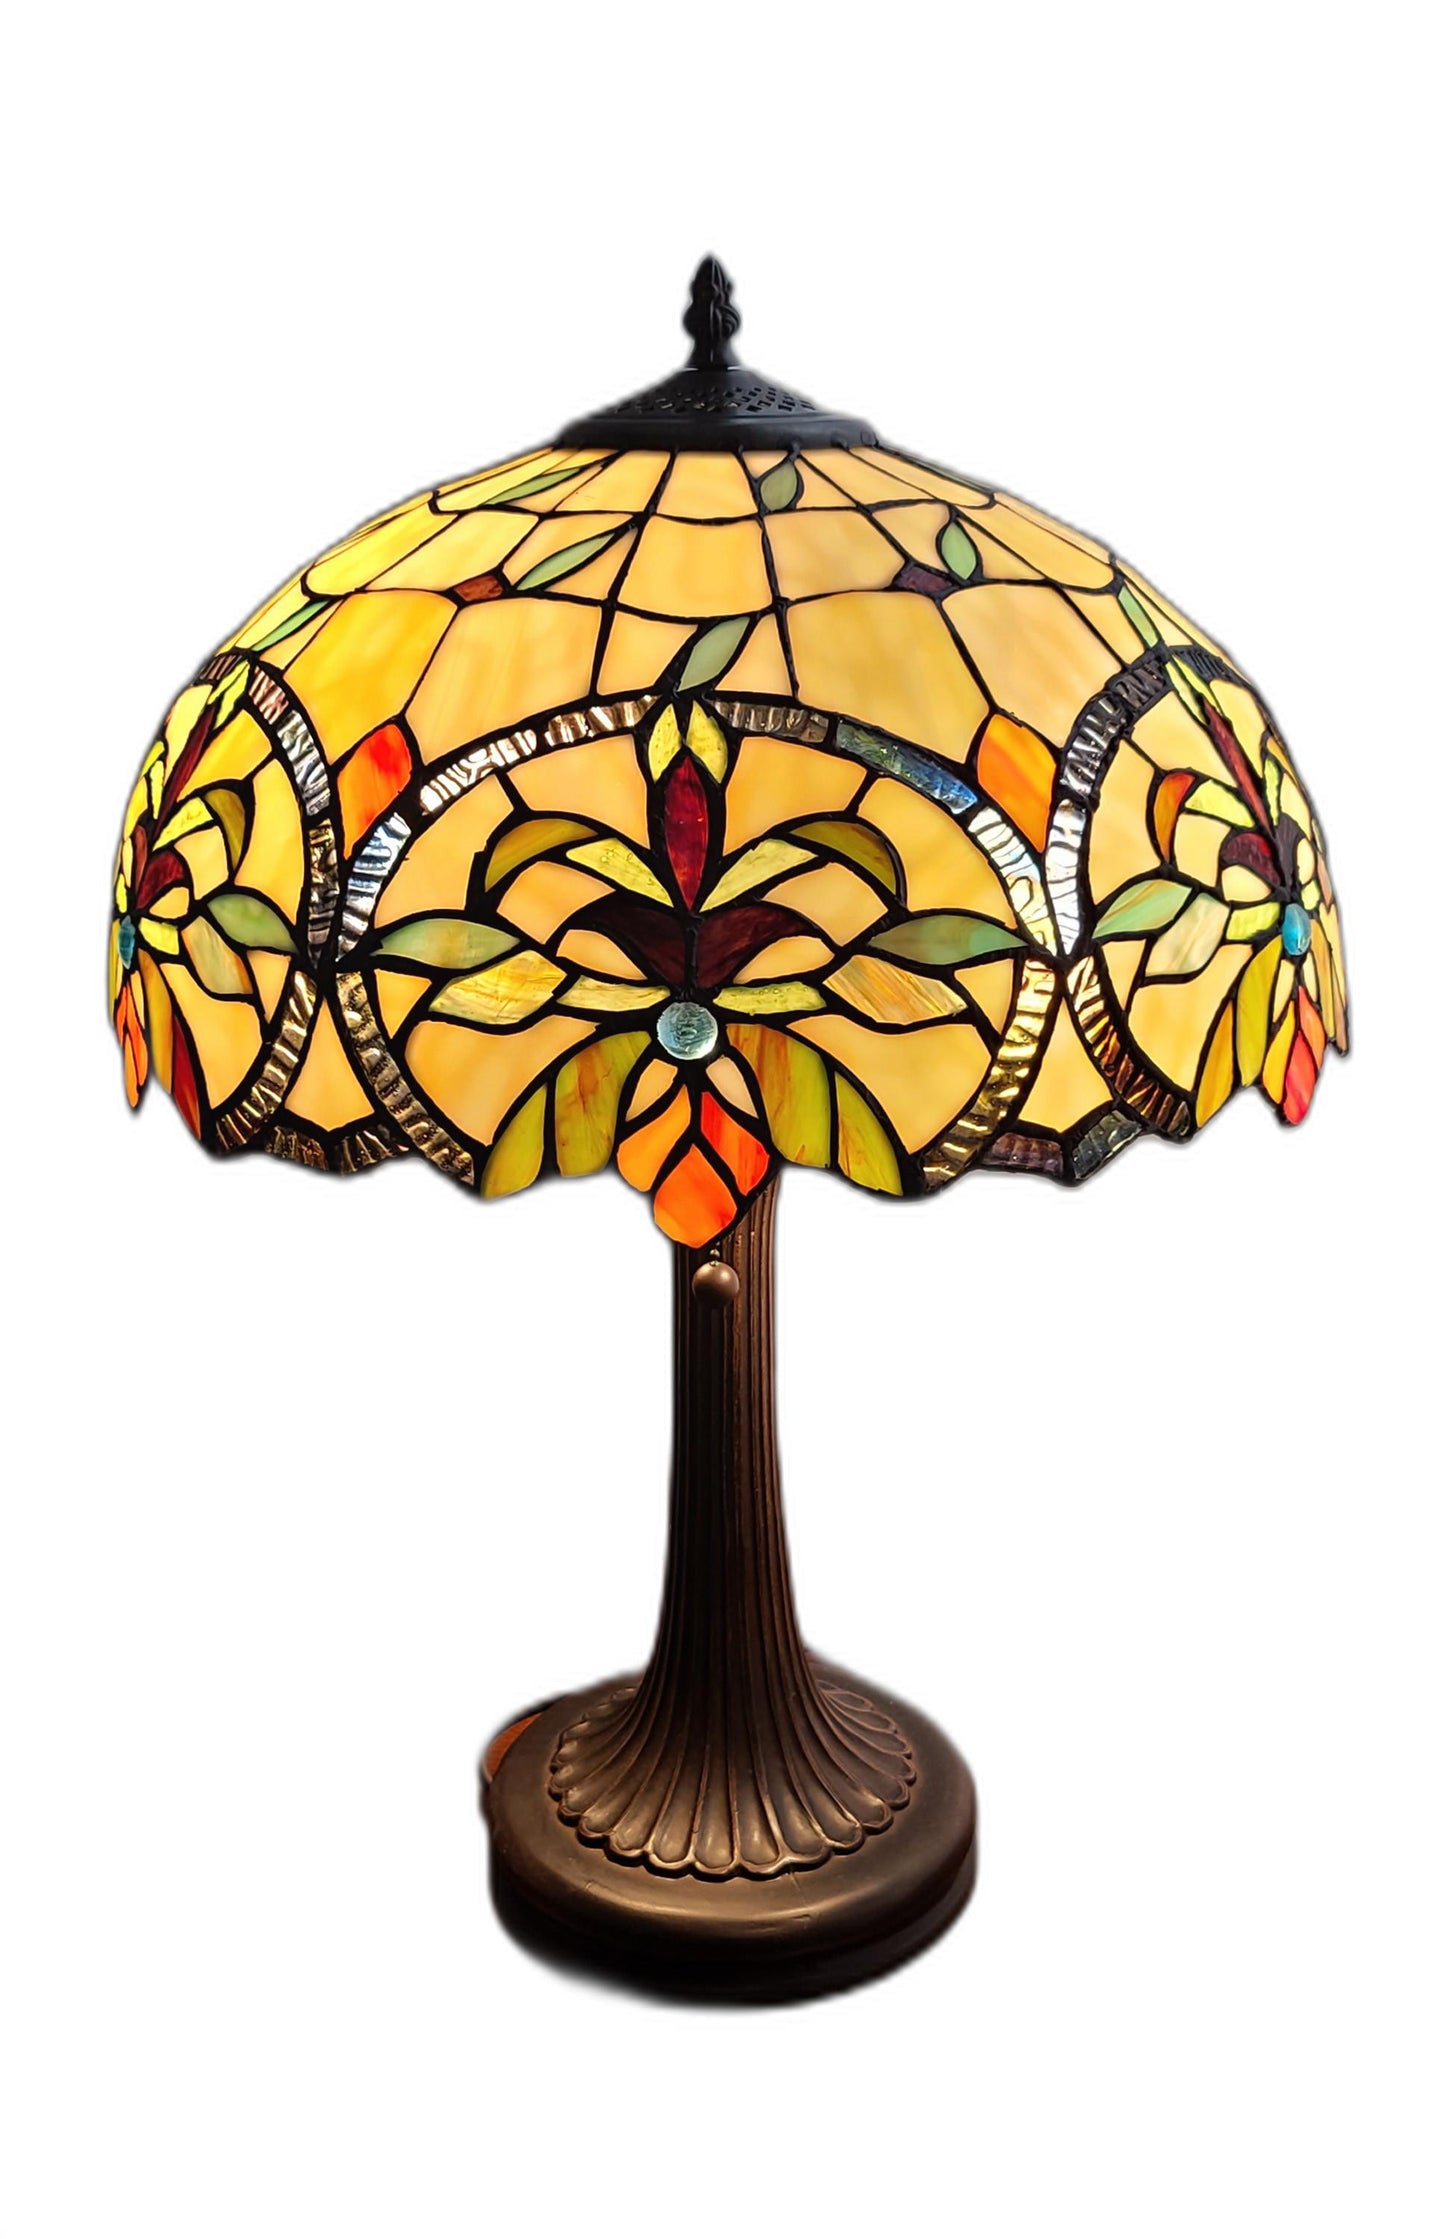 23" Stained Glass Two Light Jeweled Floral Table Lamp